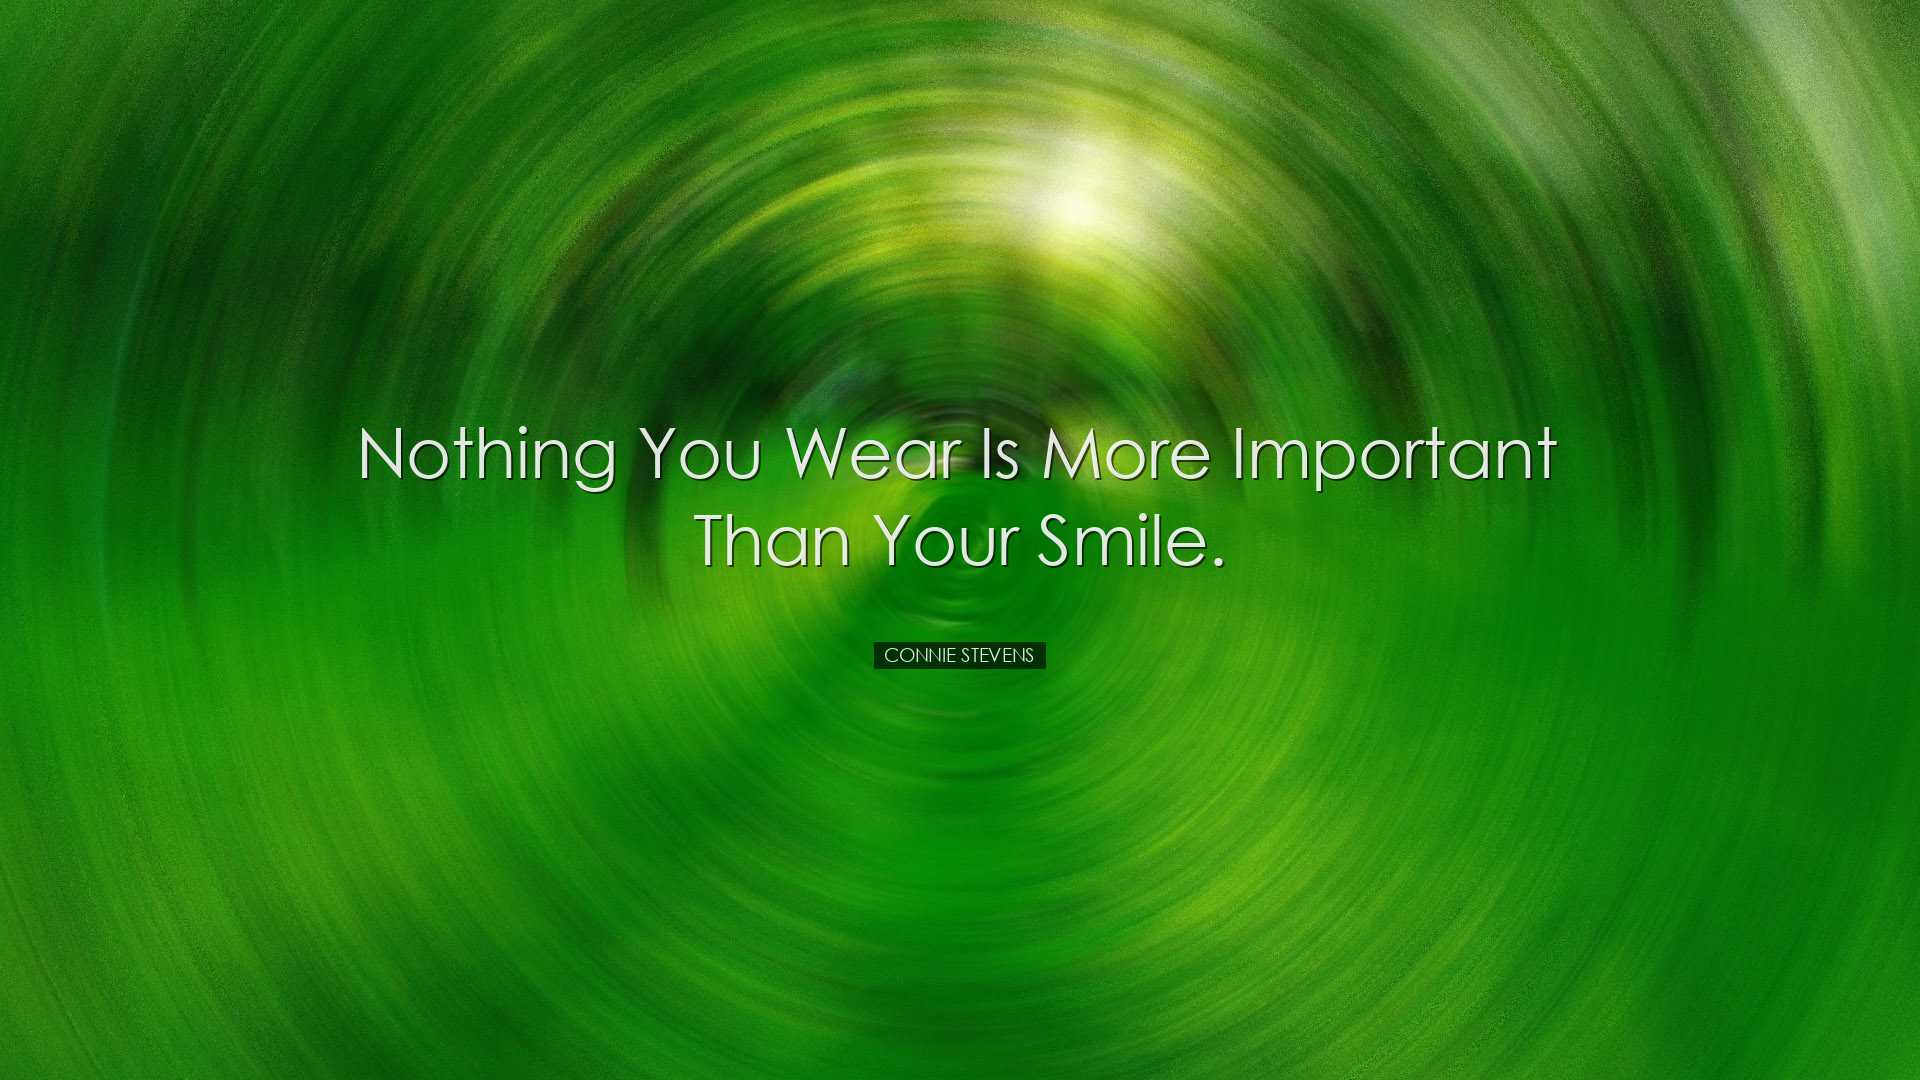 Nothing you wear is more important than your smile. - Connie Steve